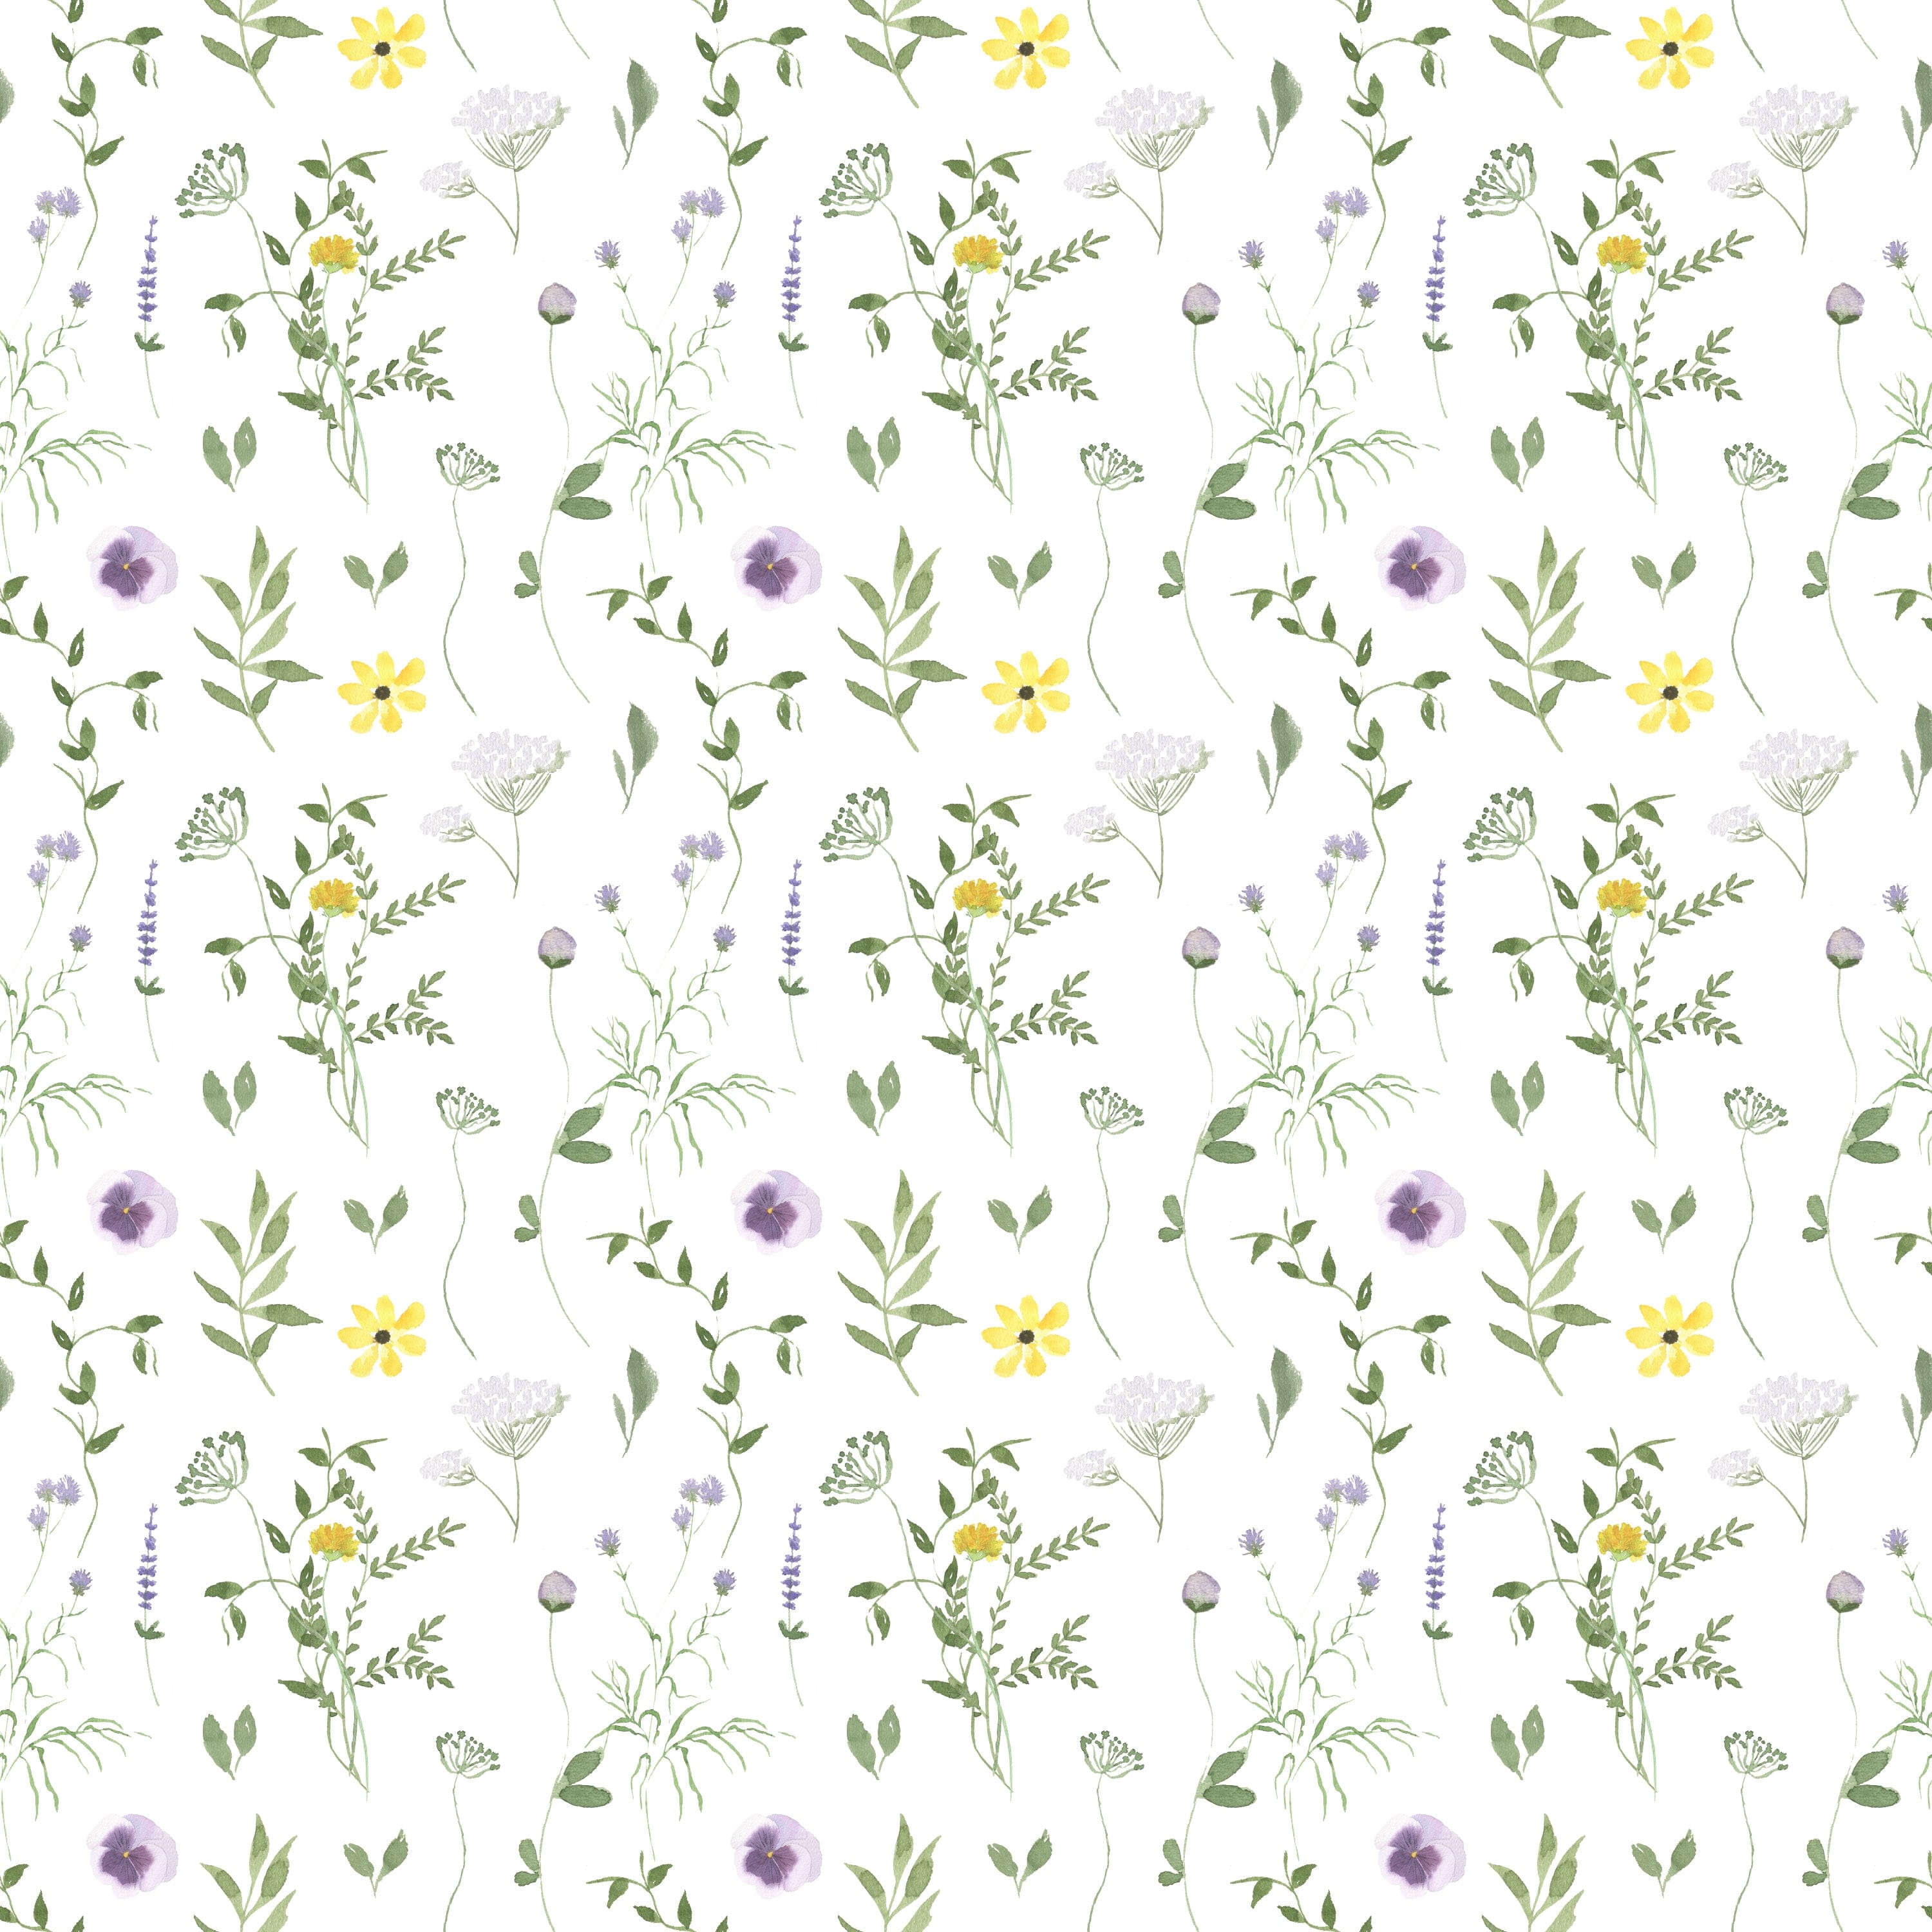 Pattern detail of the Spring Field Wallpaper - VII, highlighting its elegant watercolor-style design with purple and yellow flowers and green leaves on a white background